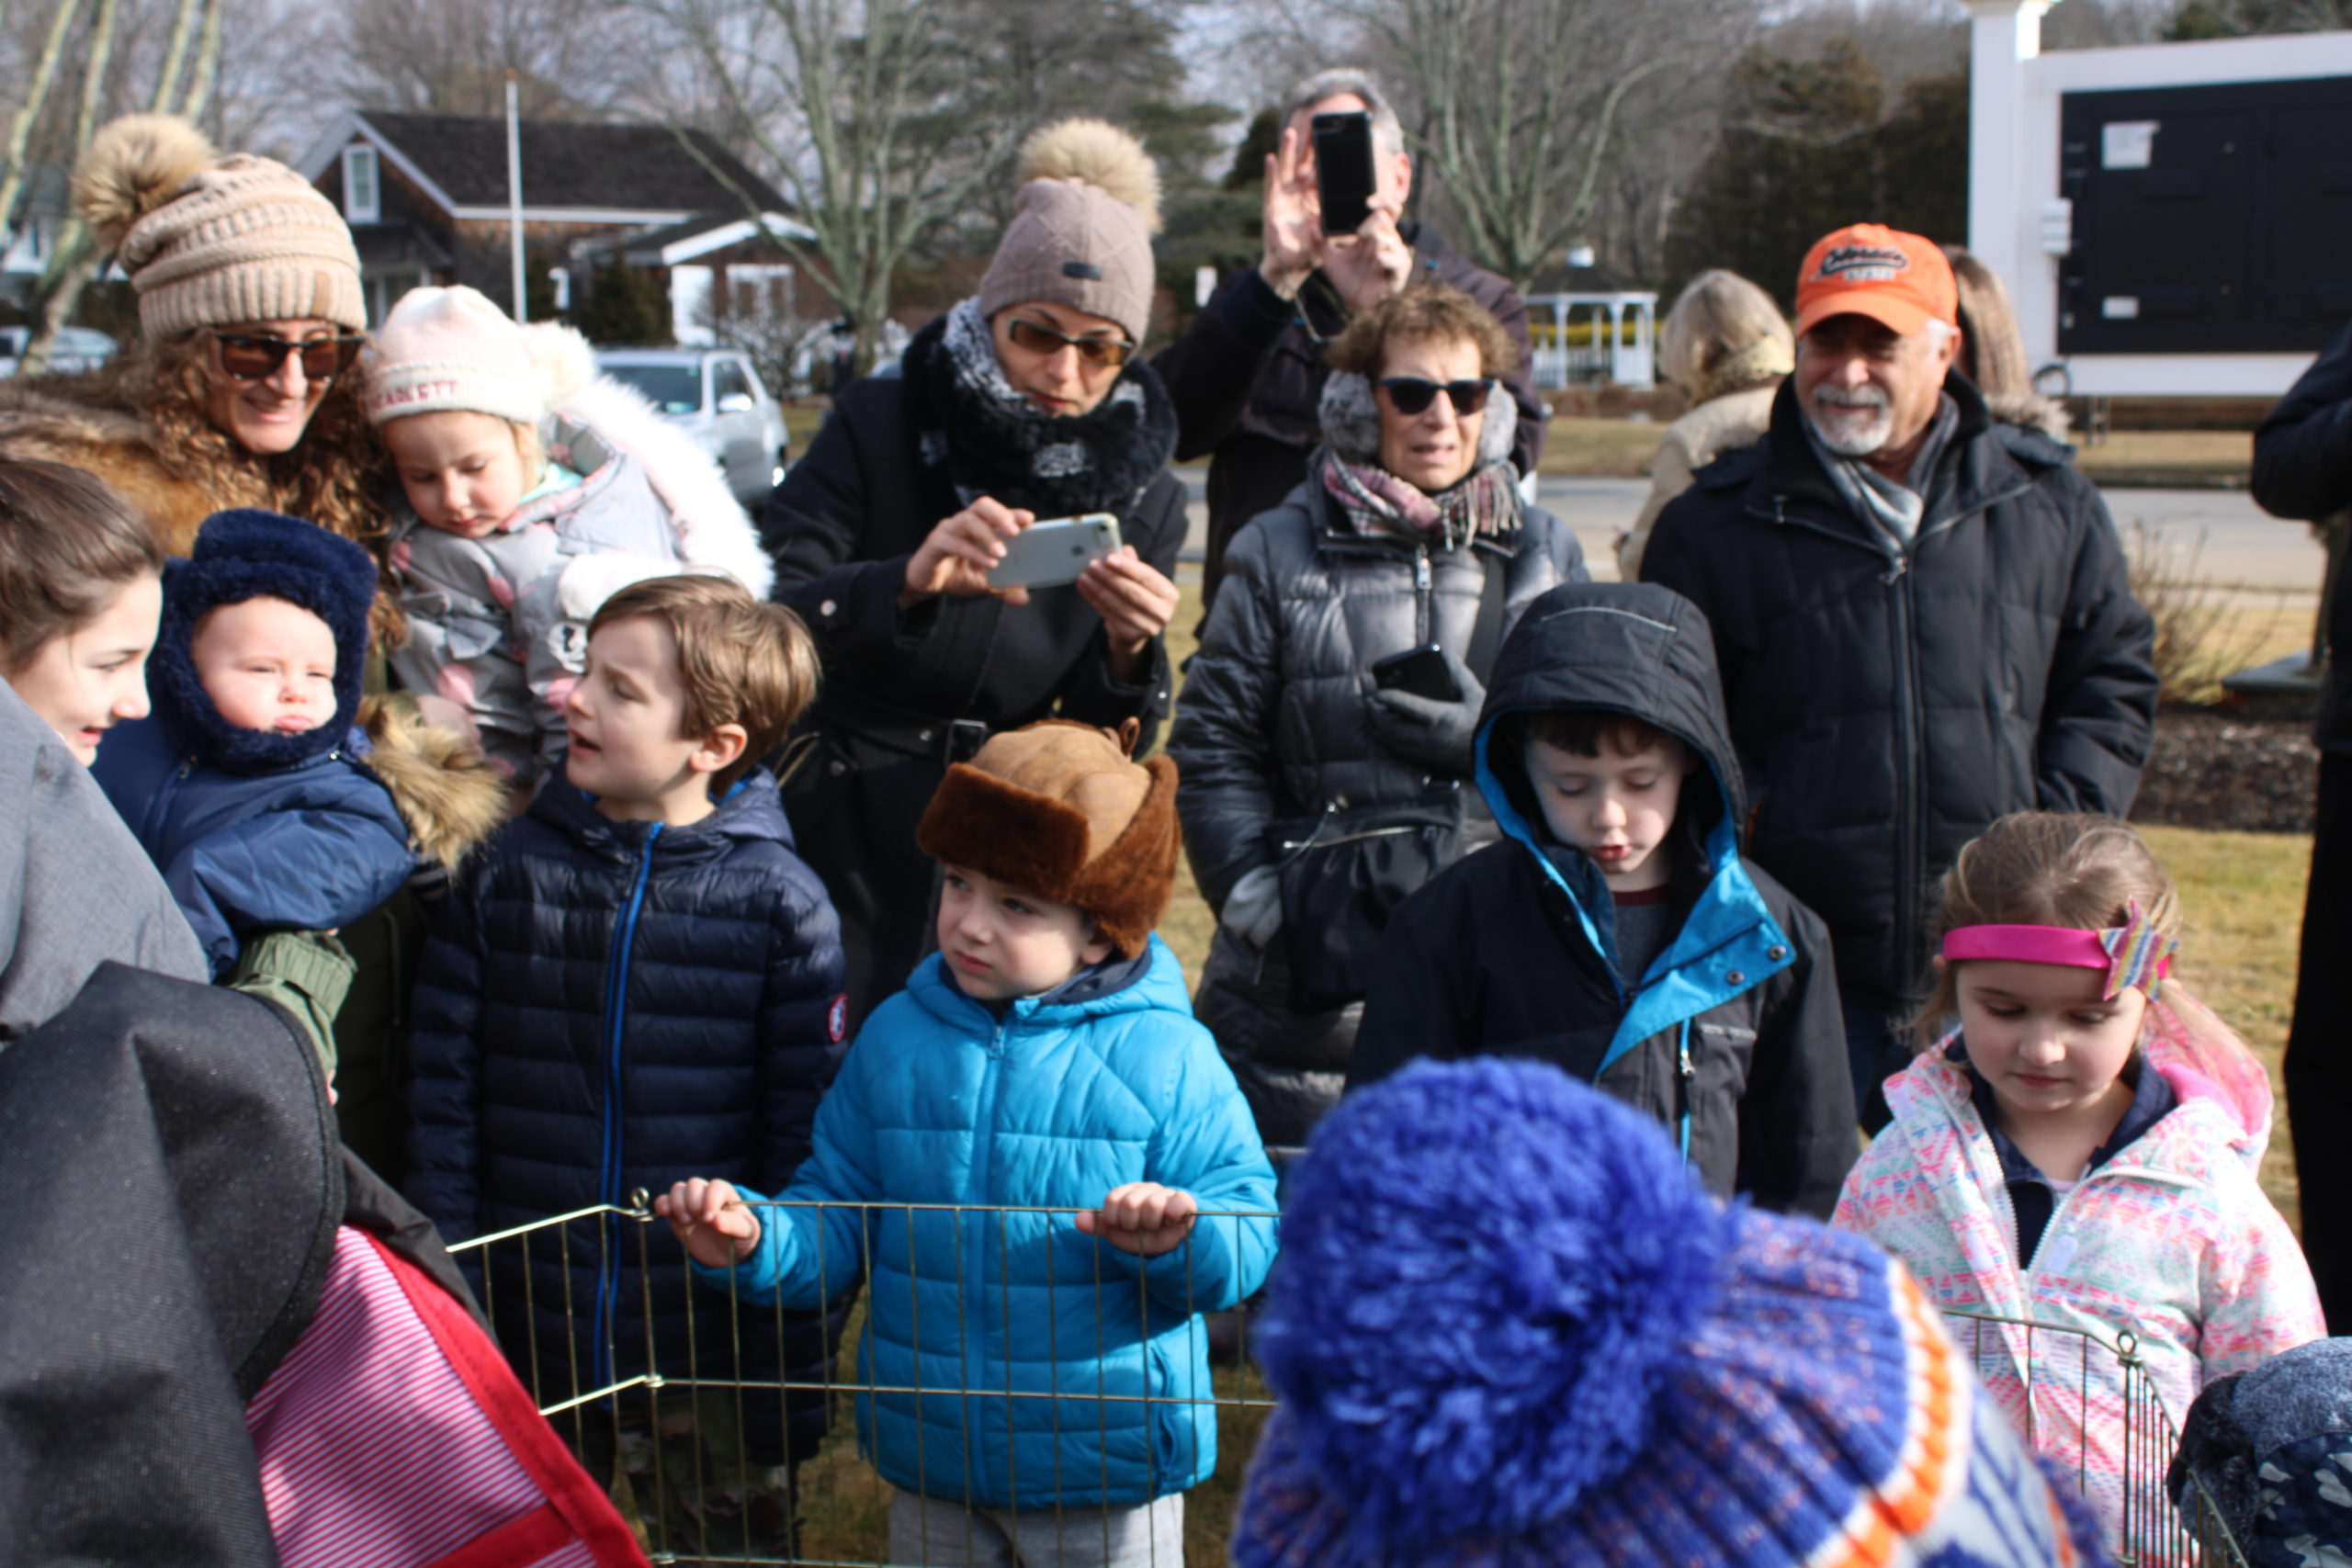 'Quigley' visited Quogue Village Fire Department on Sunday and announced an early spring. 